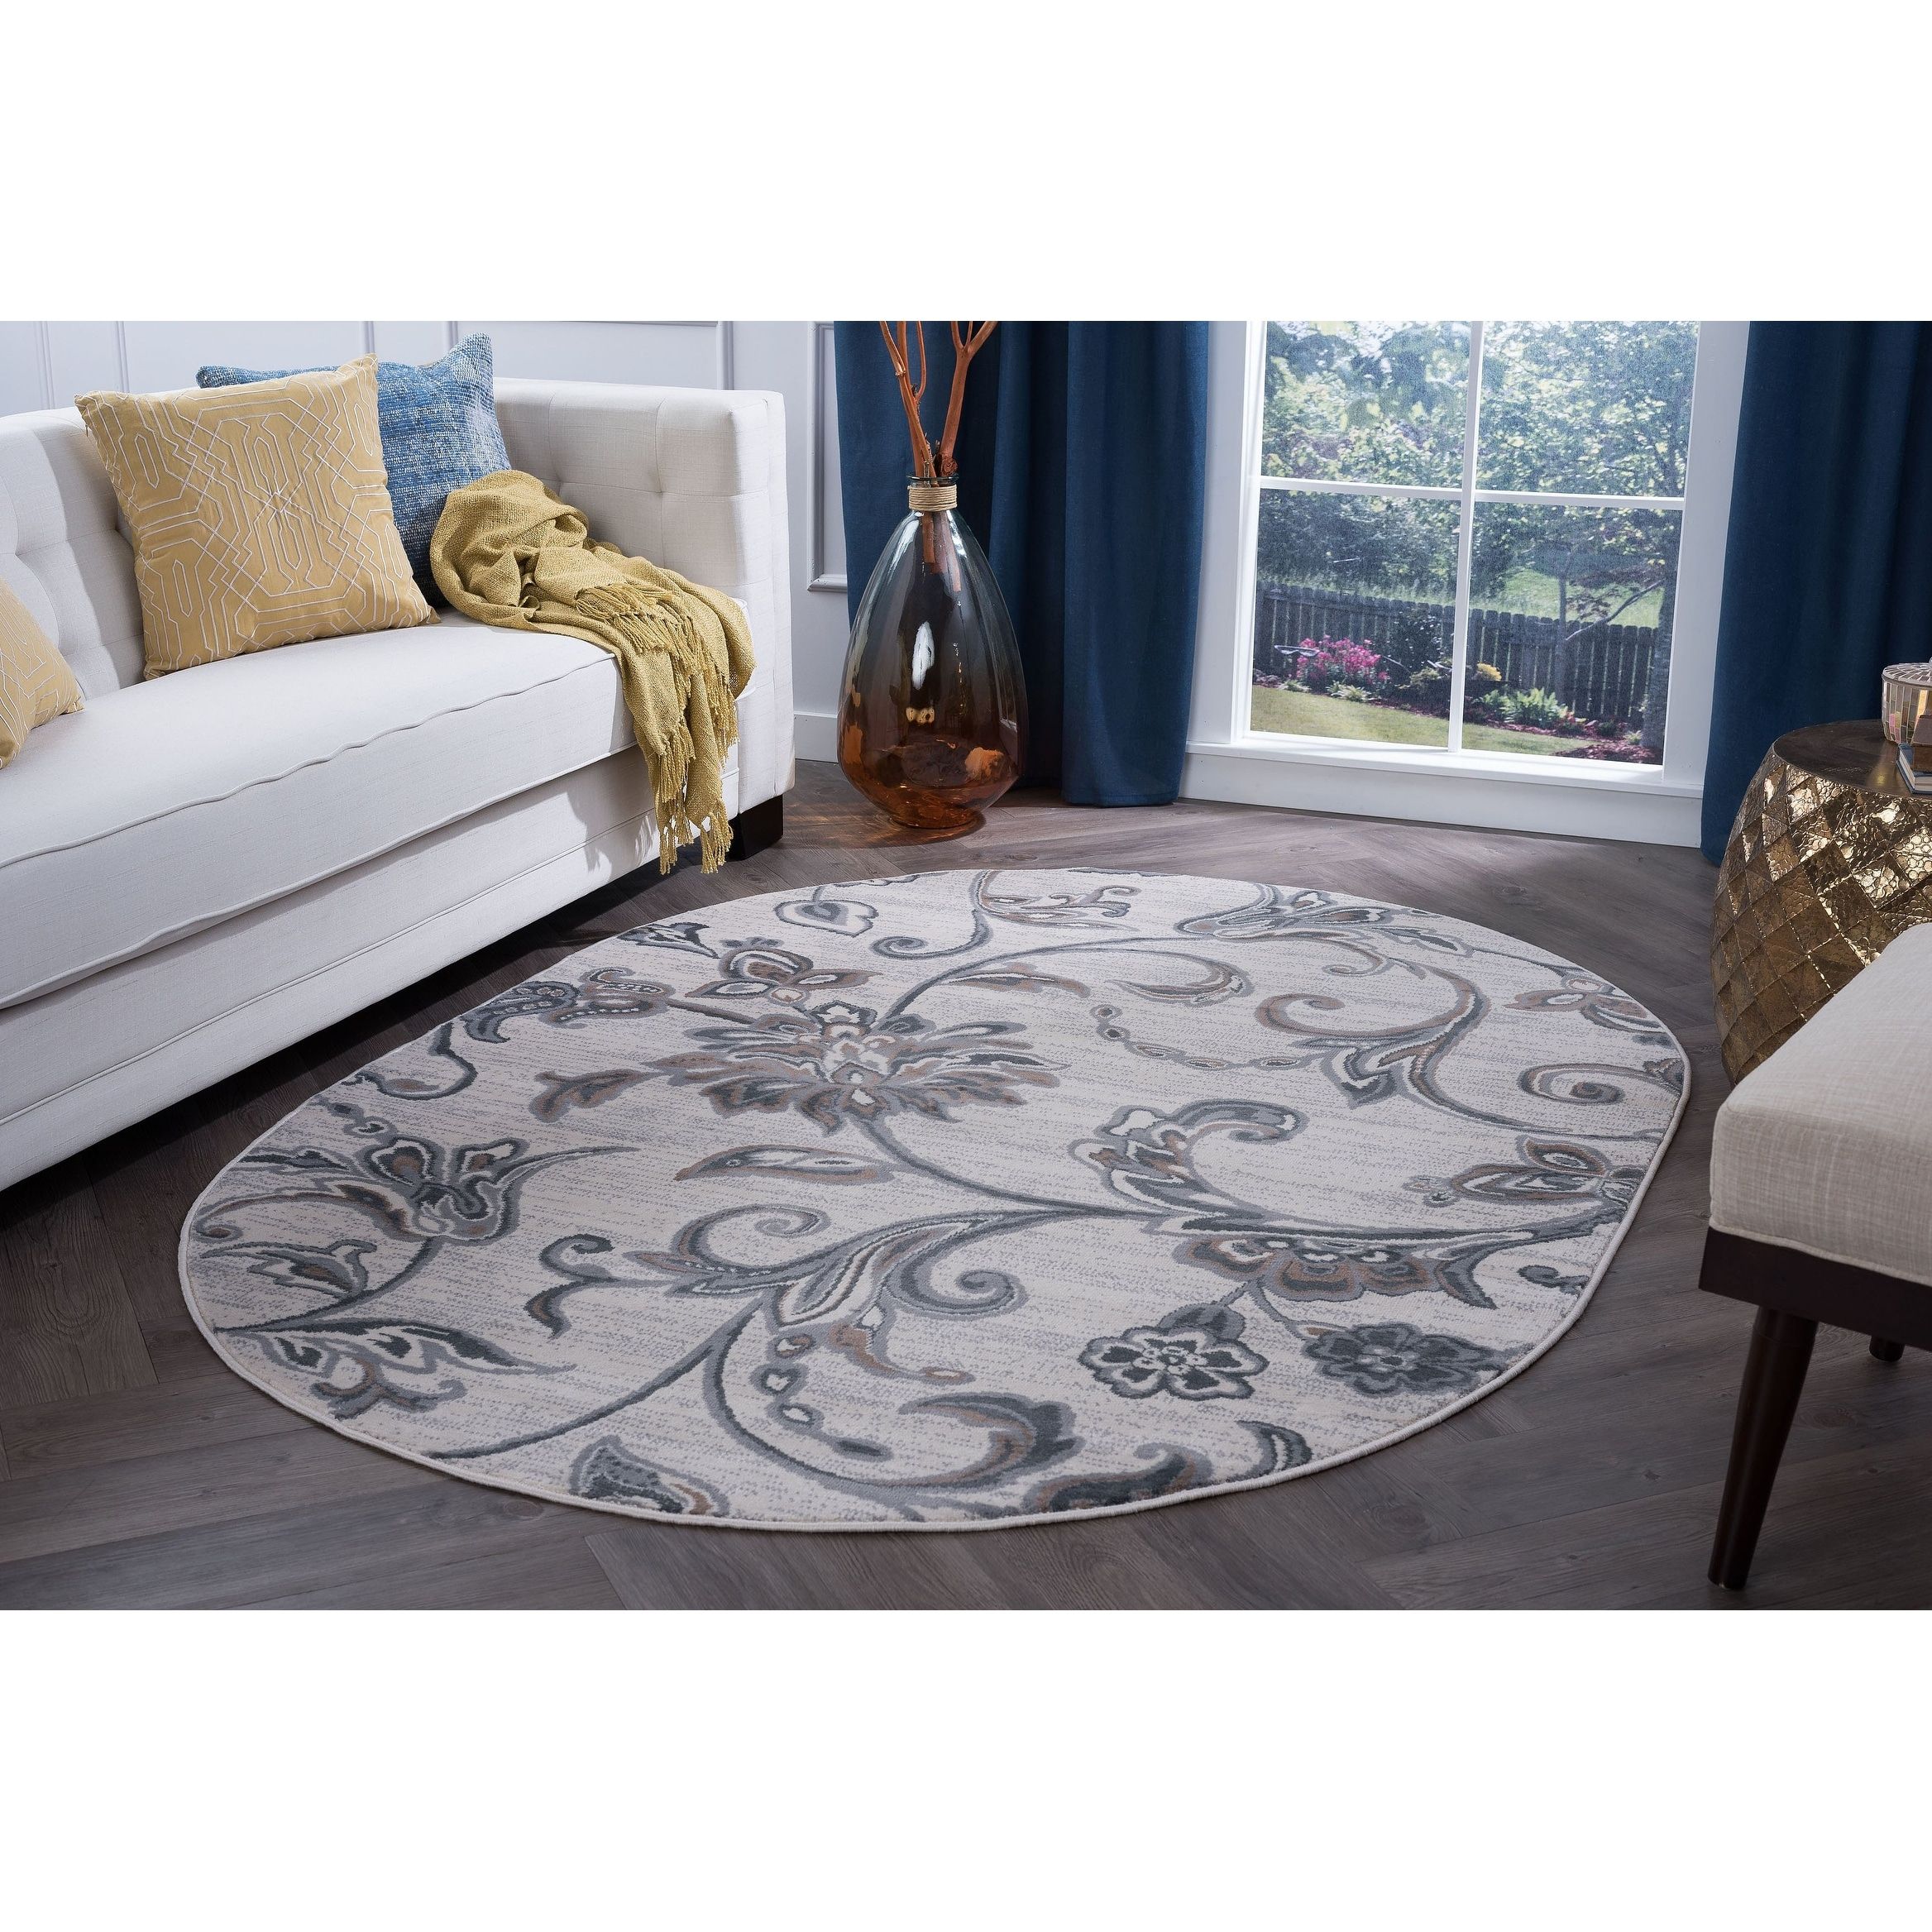 Alise Rugs Carrington Transitional Floral & Botanical Indoor Area Rug Cream  5'3'' X 7'3'' Oval Floral & Botanical 5' X 8' Indoor Living Room, Bedroom,  – Walmart With Botanical Oval Rugs (View 4 of 15)